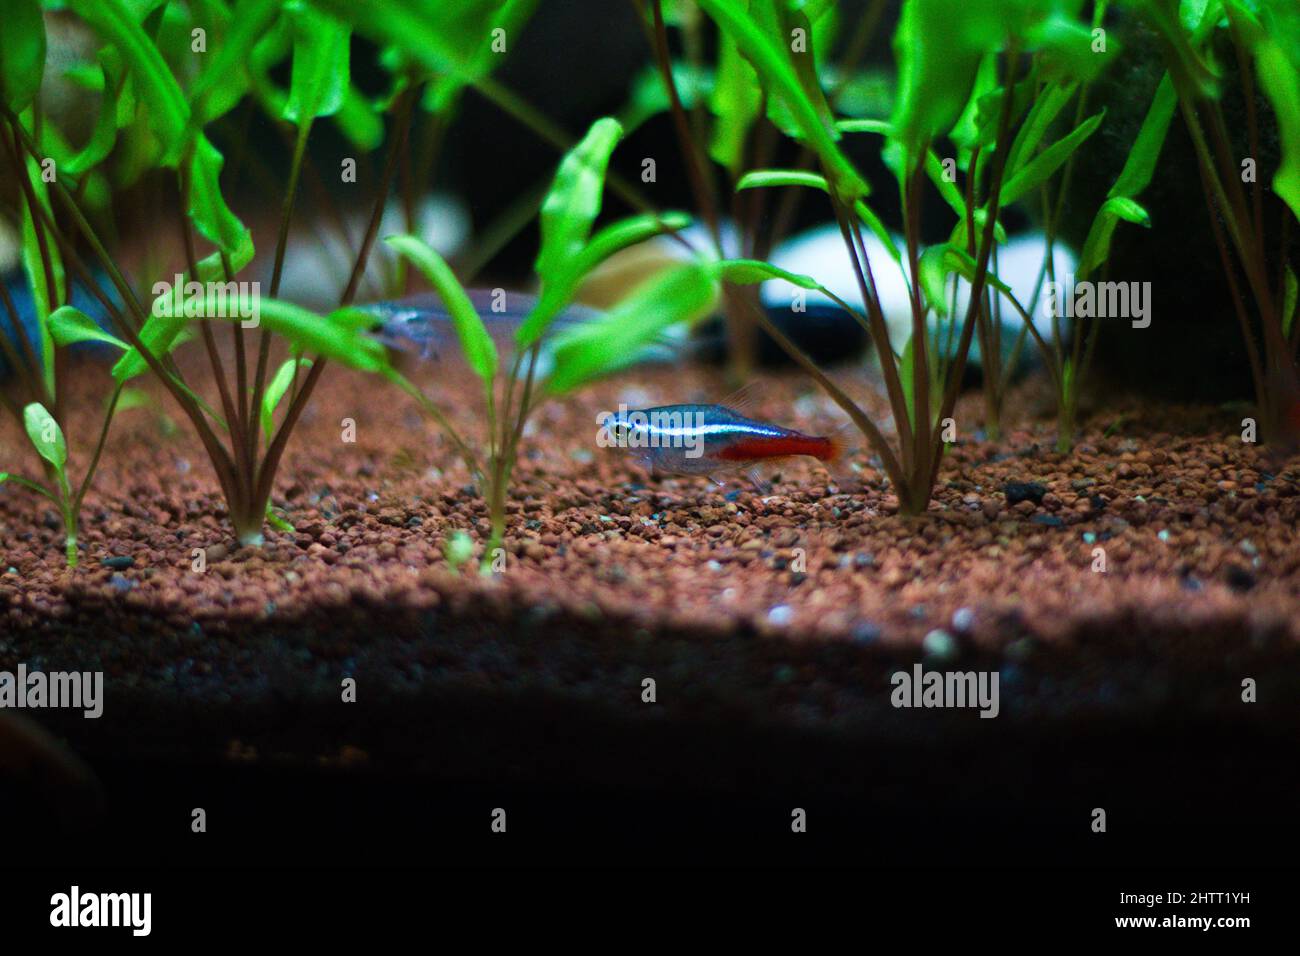 Closeup of a Neon tetra fish between Cryptocoryne willisii plants with rocky ground Stock Photo